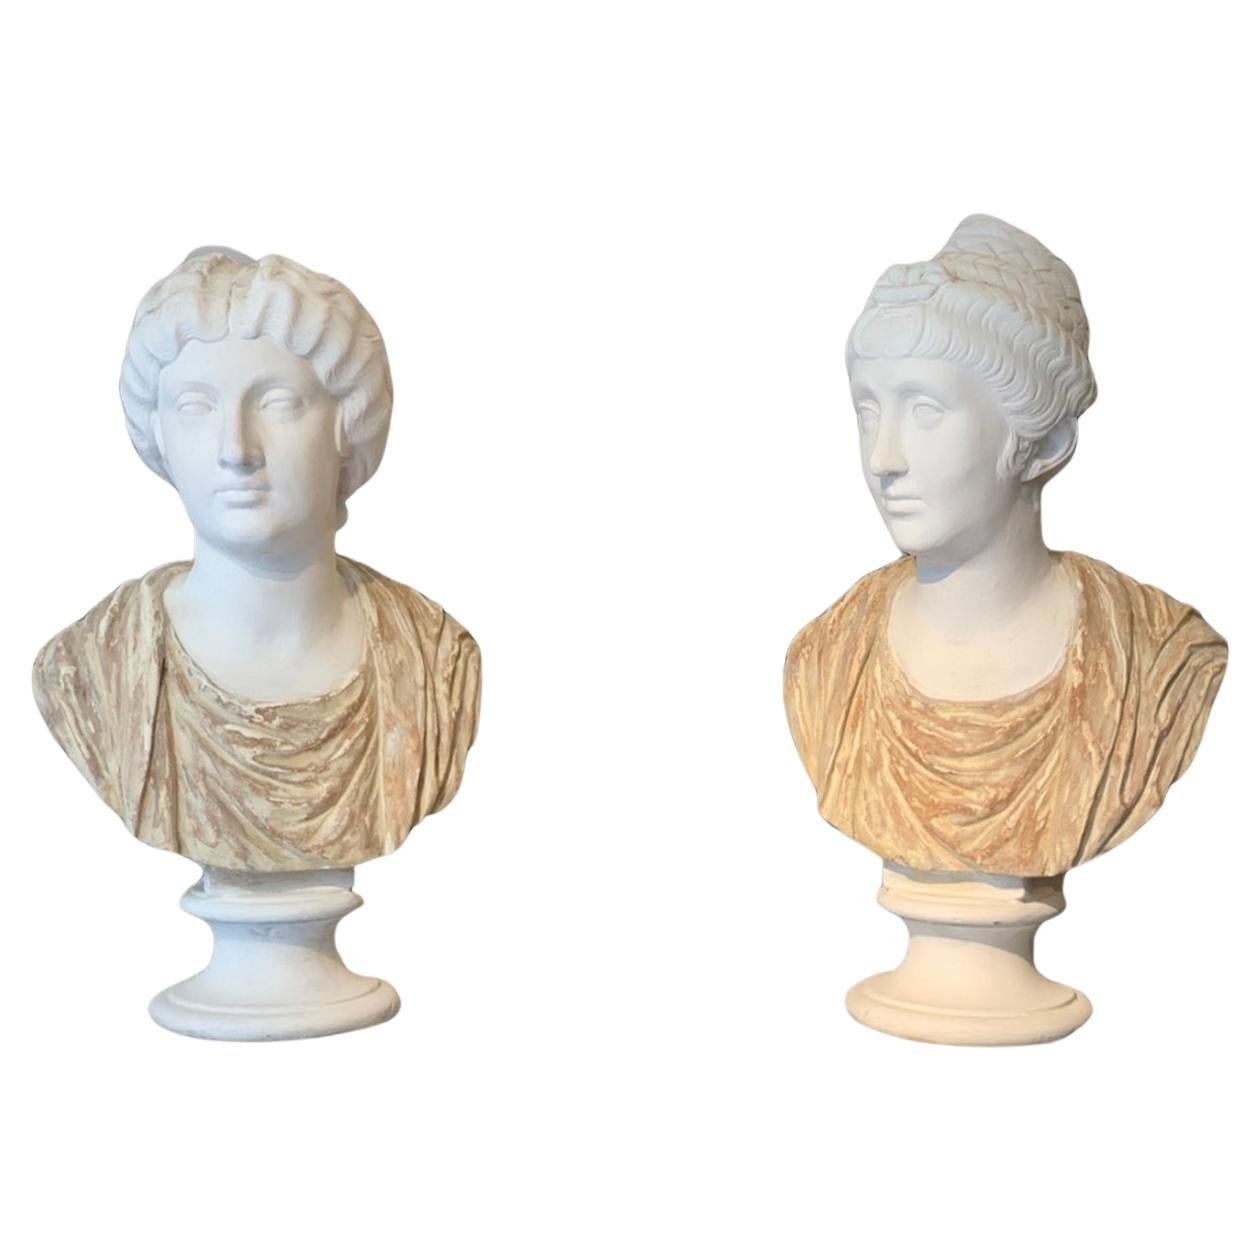 19th CENTURY PAIR OF NEOCLASSICAL BUSTS IN TERRACOTTA AND PLASTER